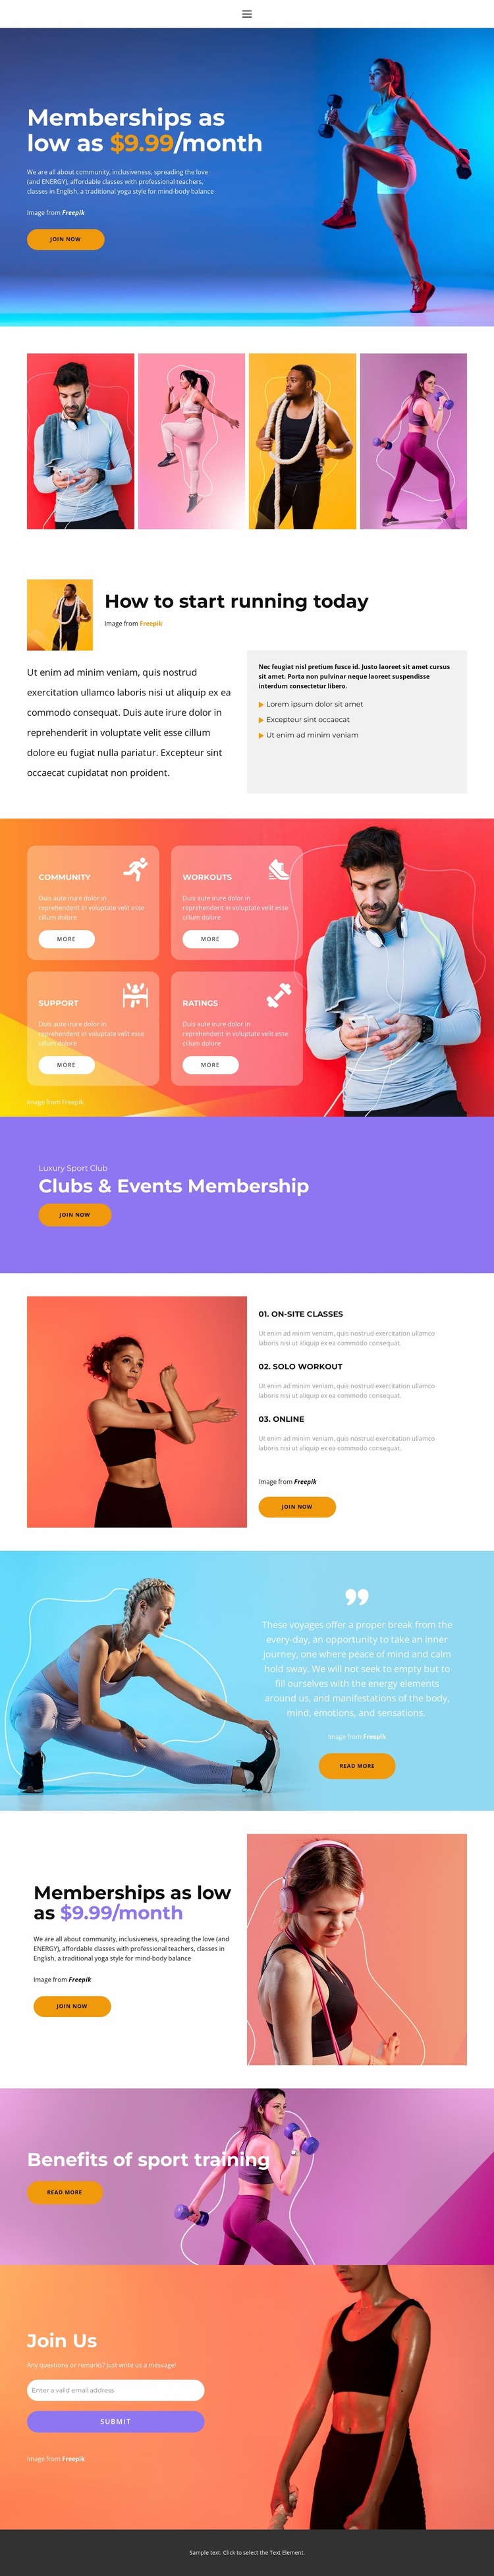 Sports every day Website Builder Templates